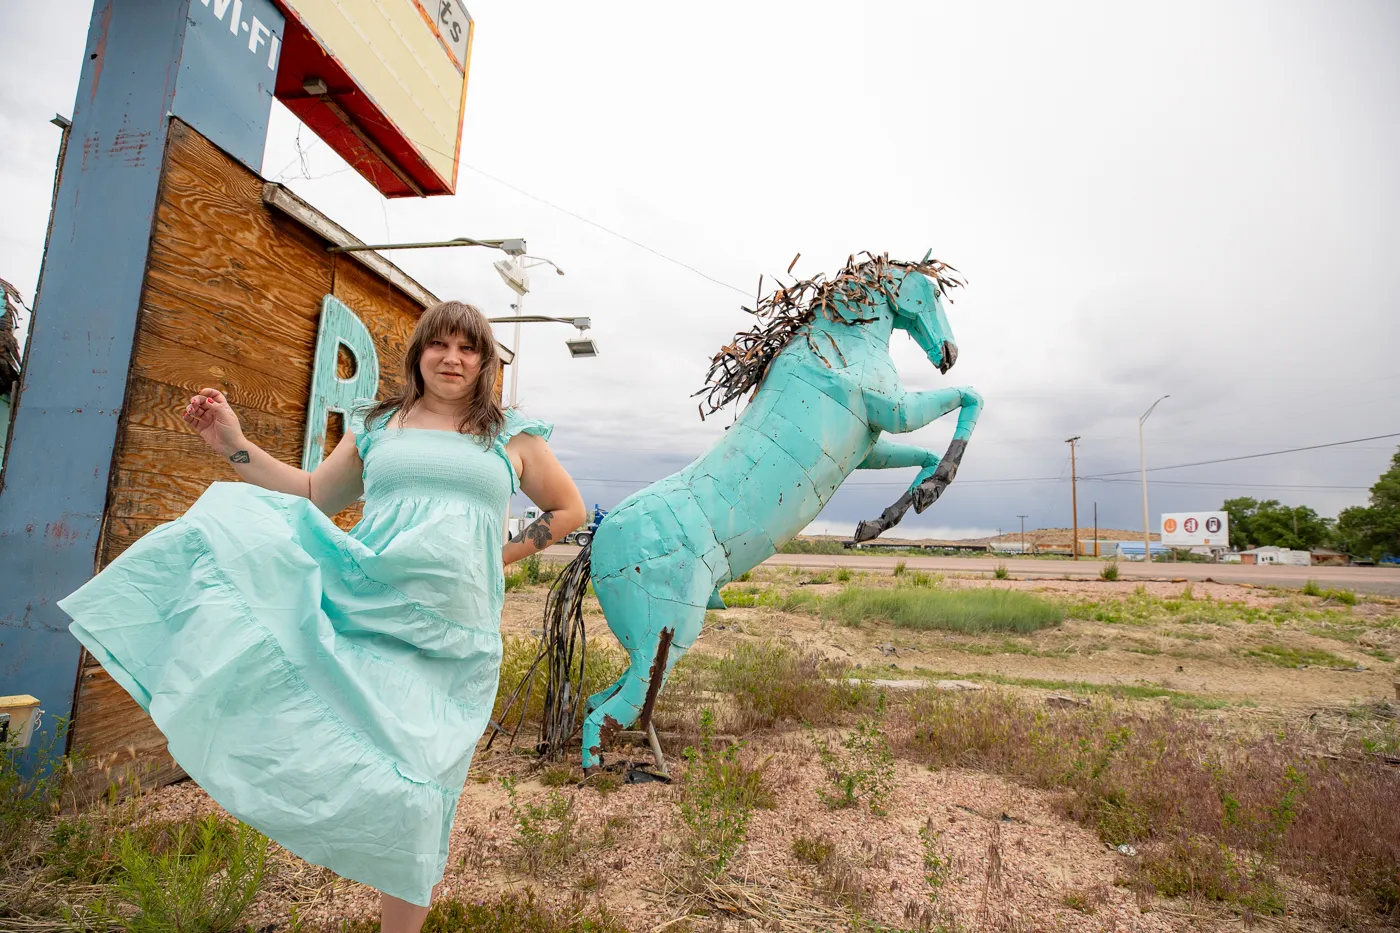 Ranch Kitchen Turquoise Horses in Gallup, New Mexico Route 66 Roadside Attraction